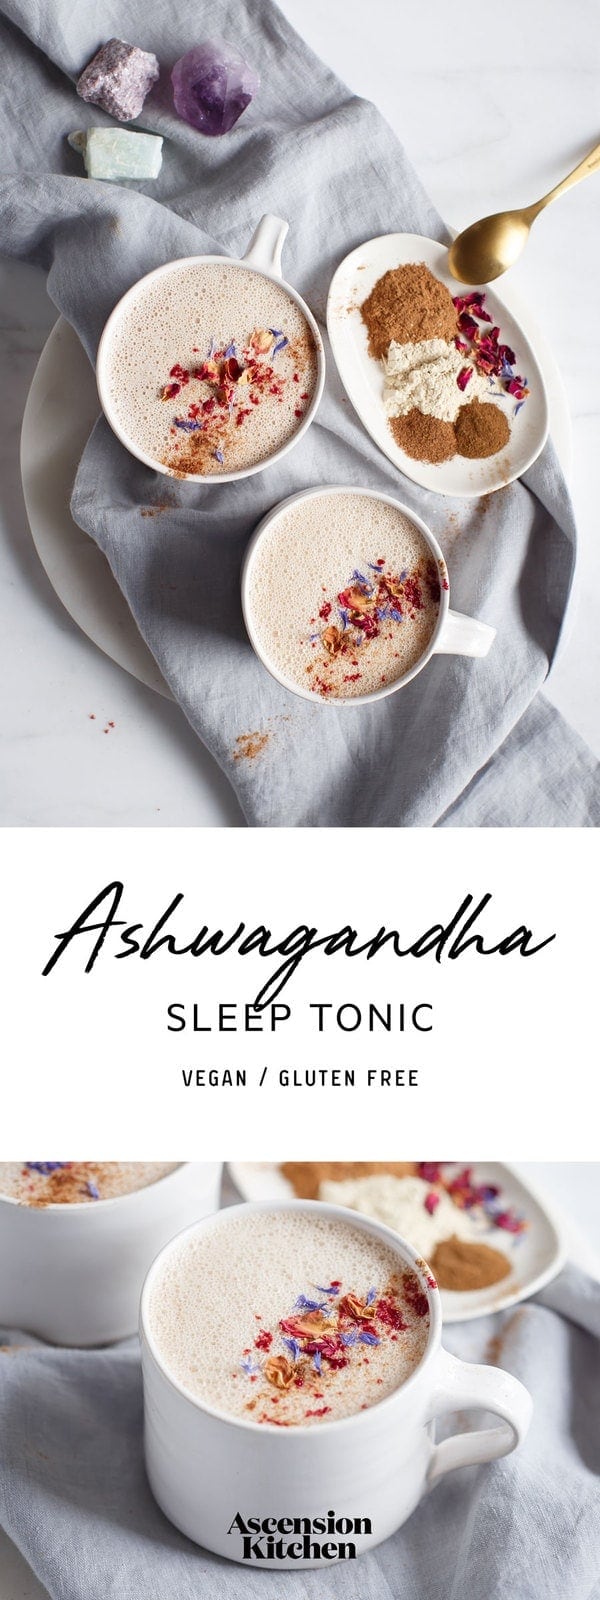 Ashwagandha milk – a tonic to help support sleep and relieve stress and anxiety. #Ashwagandhatonic #Adaptogen #HerbalSleepTonic #AshwagandaMilk #Ashwagandhadrink #Ayurveda #AscensionKitchen // Pin to your own inspiration board! //